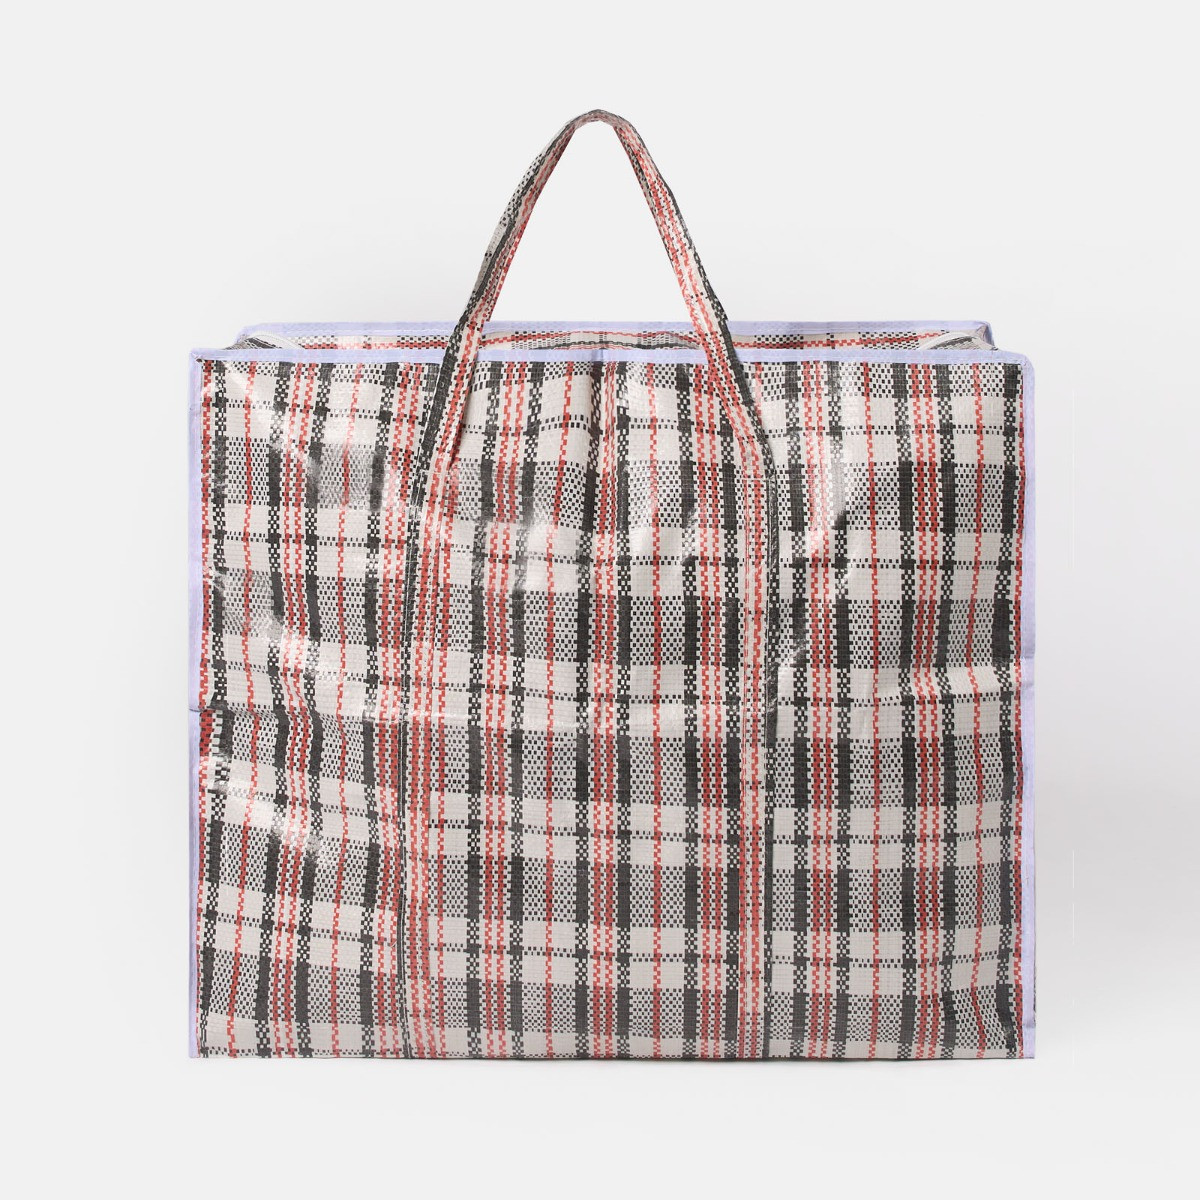 OHS Reusable Checkered Large Storage Bag - Multi